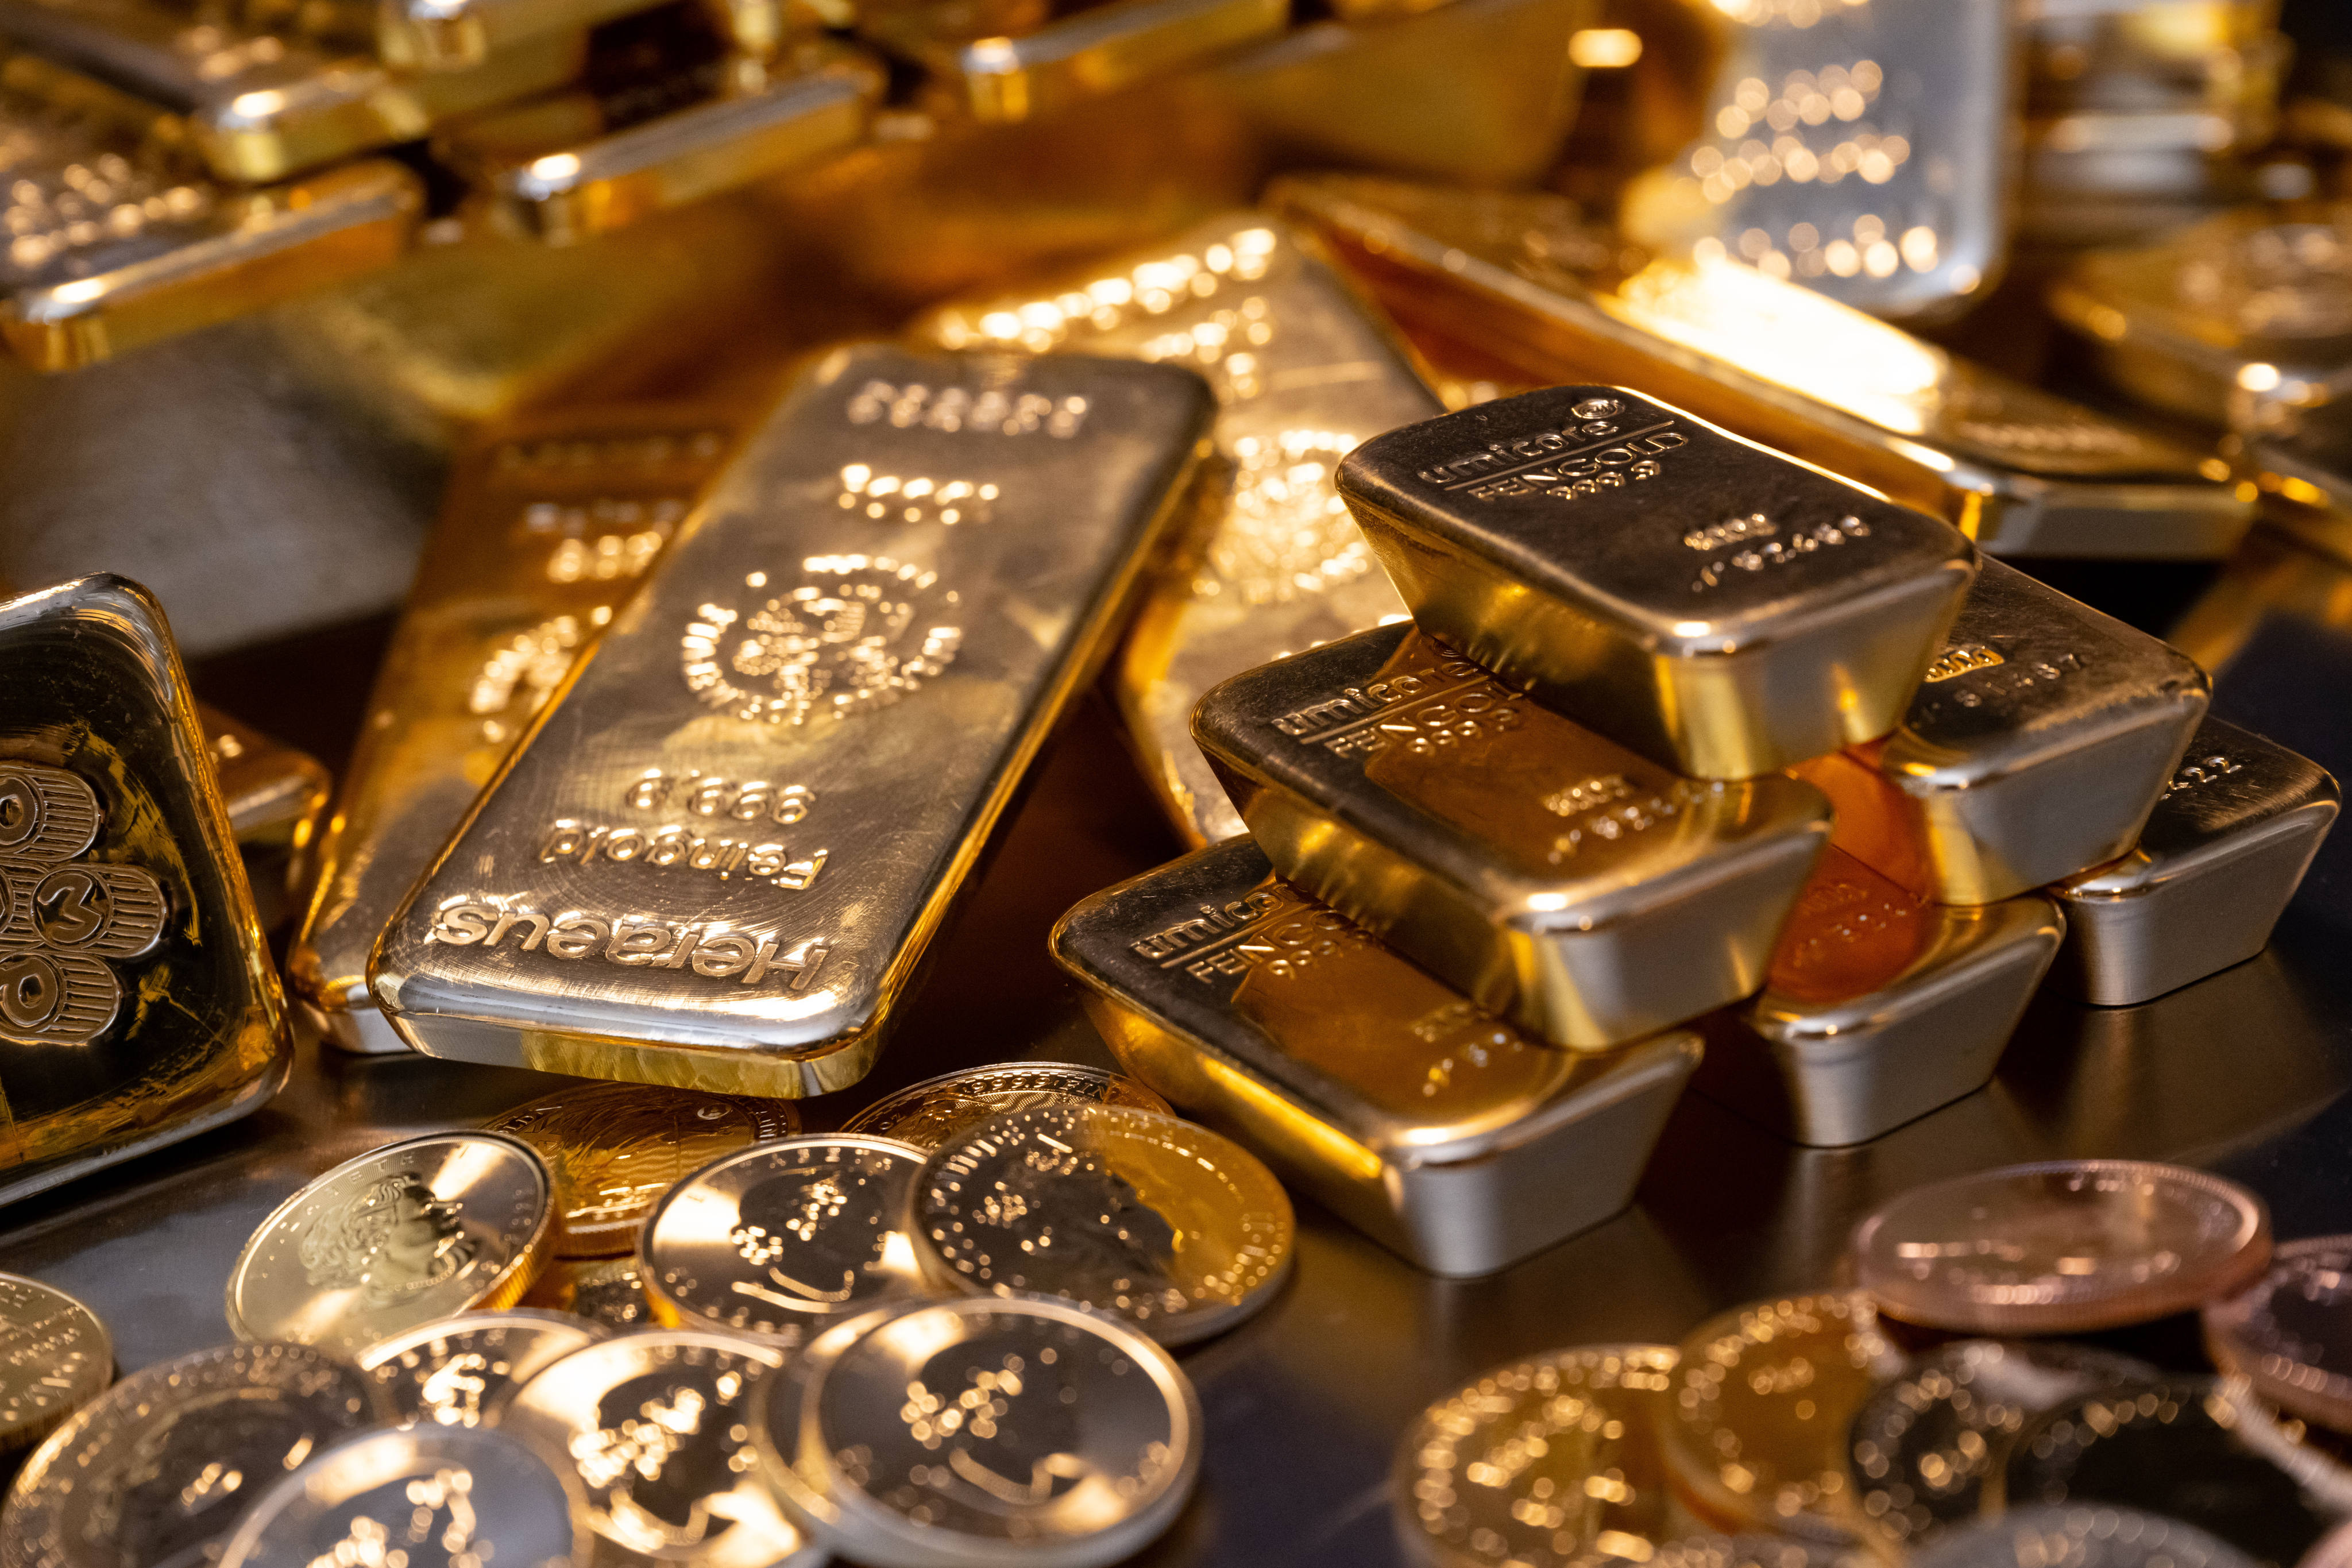 Gold bars and coins lie in a safe at the precious metal dealer Pro Aurum in Munich. Photo: DPA